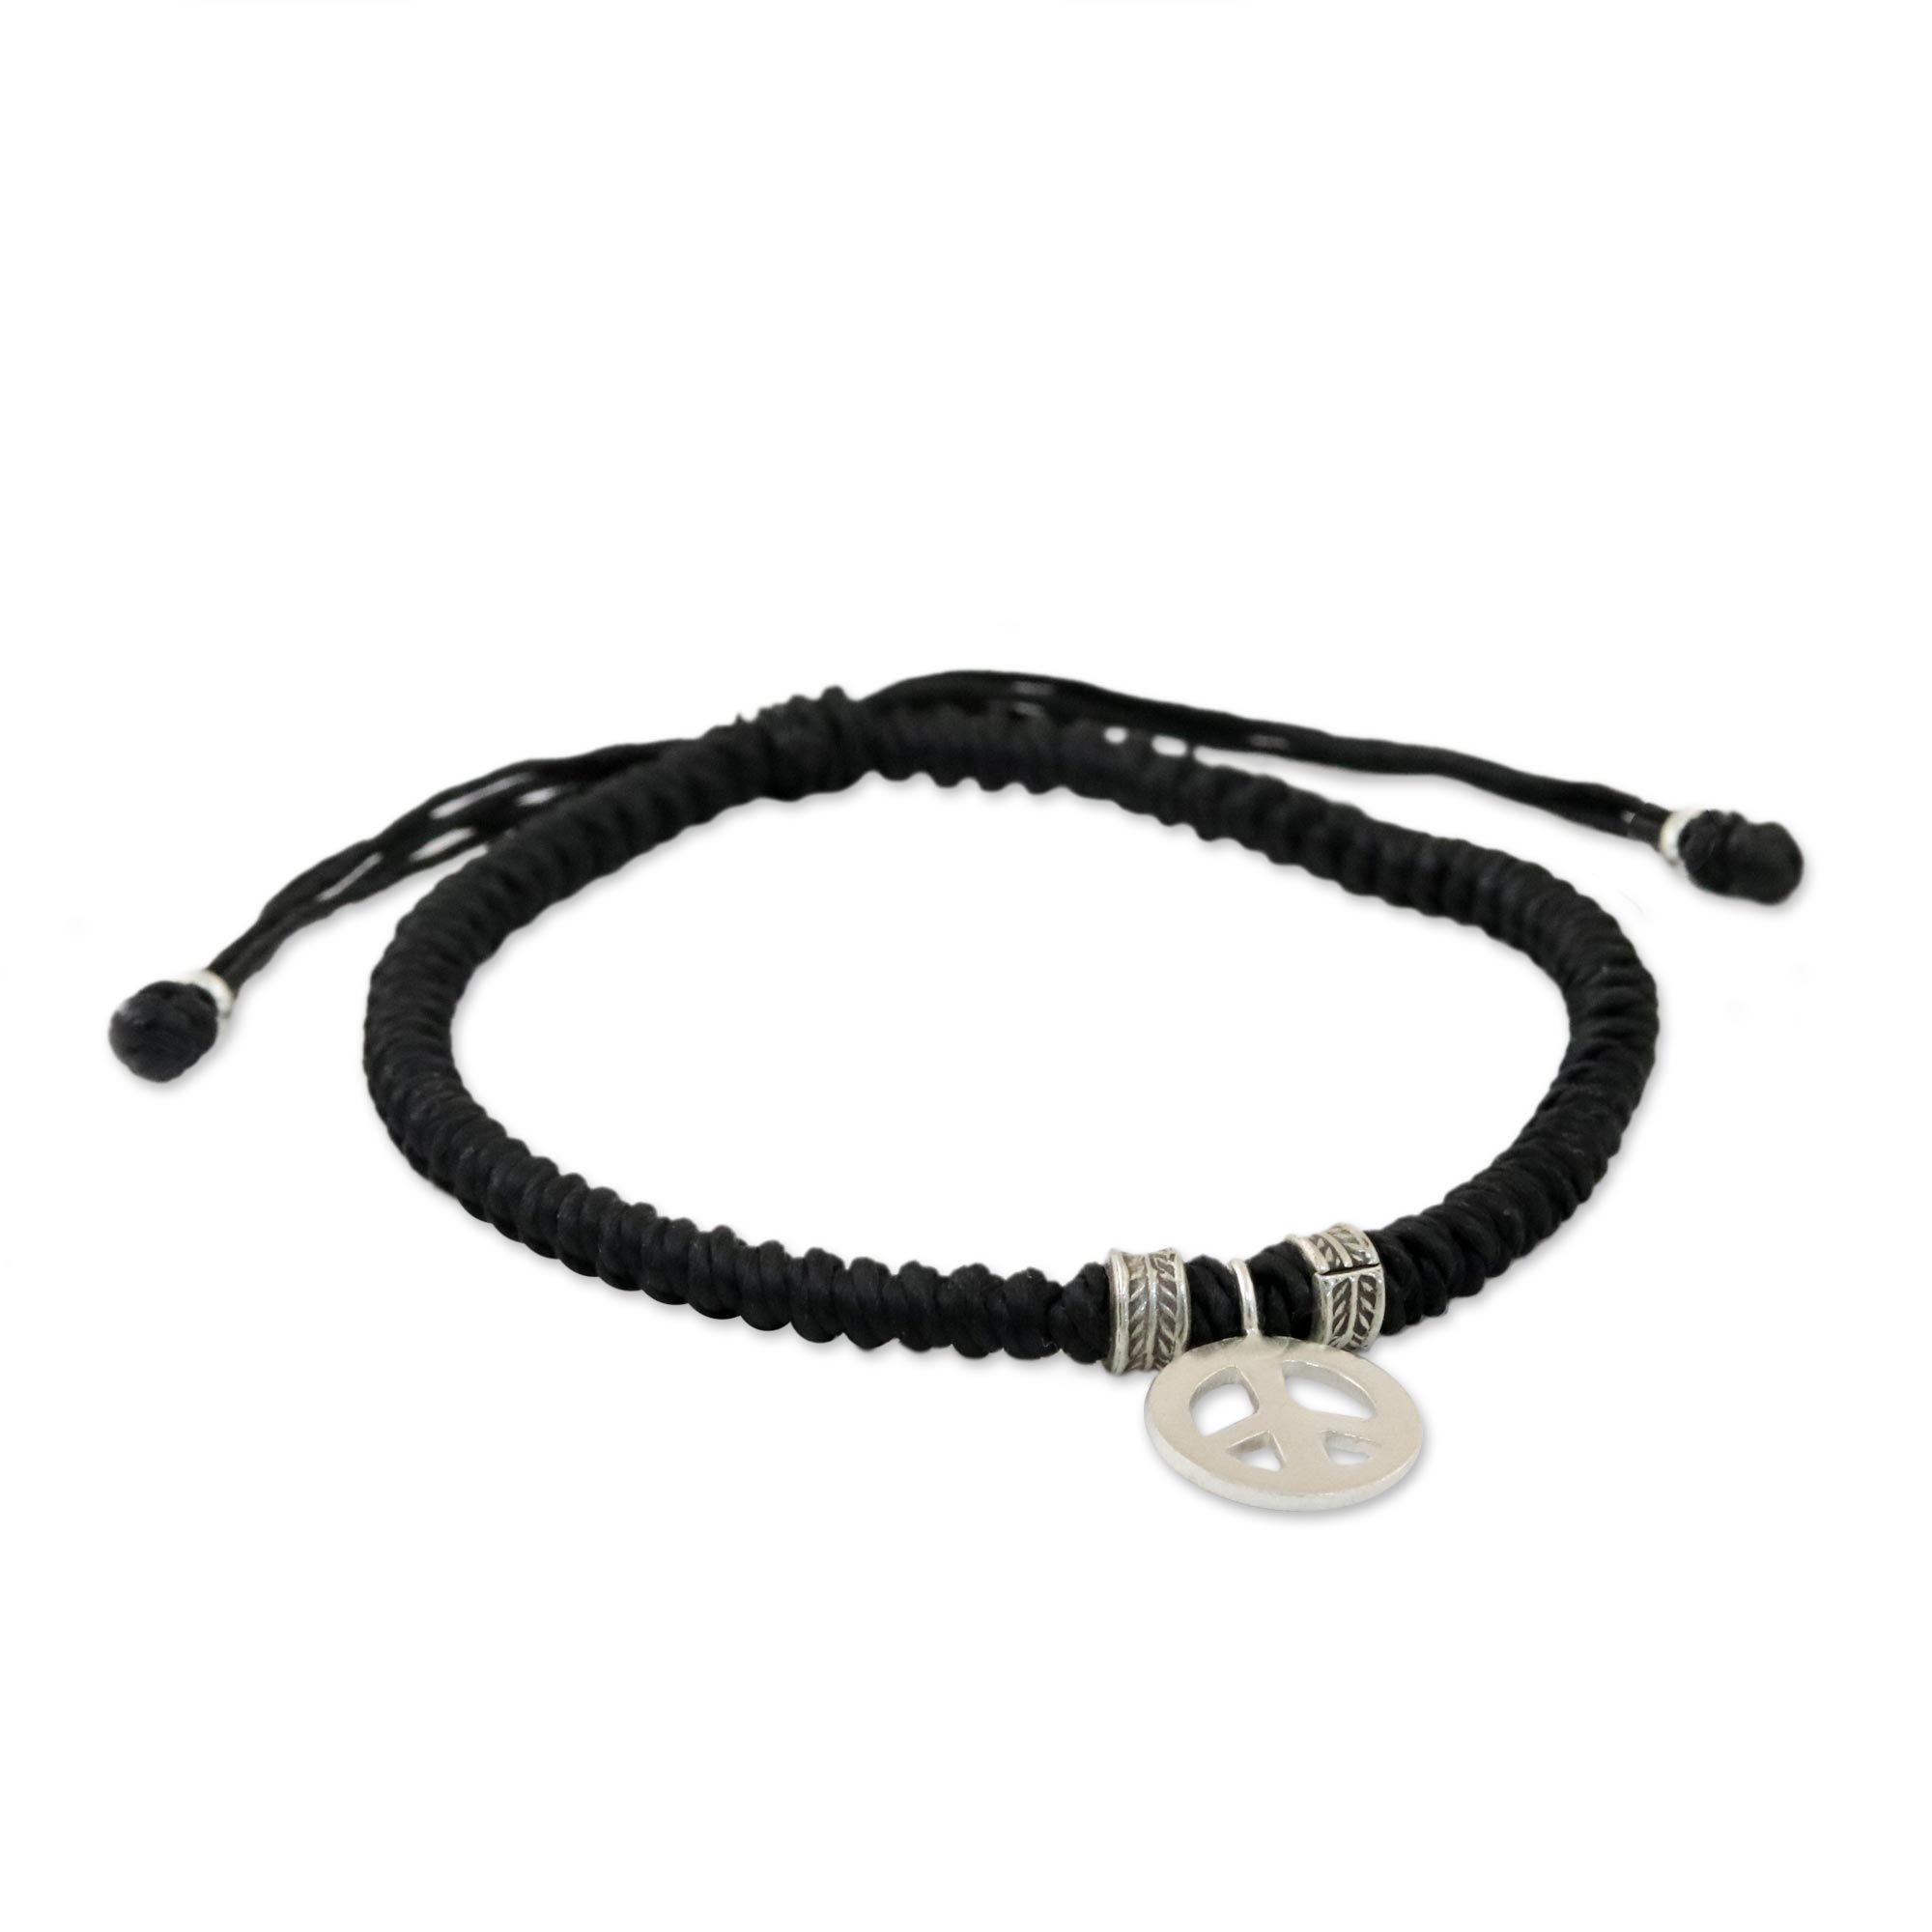 Karen Silver Peace Wristband Bracelet in Black from Thailand - Peaceful ...